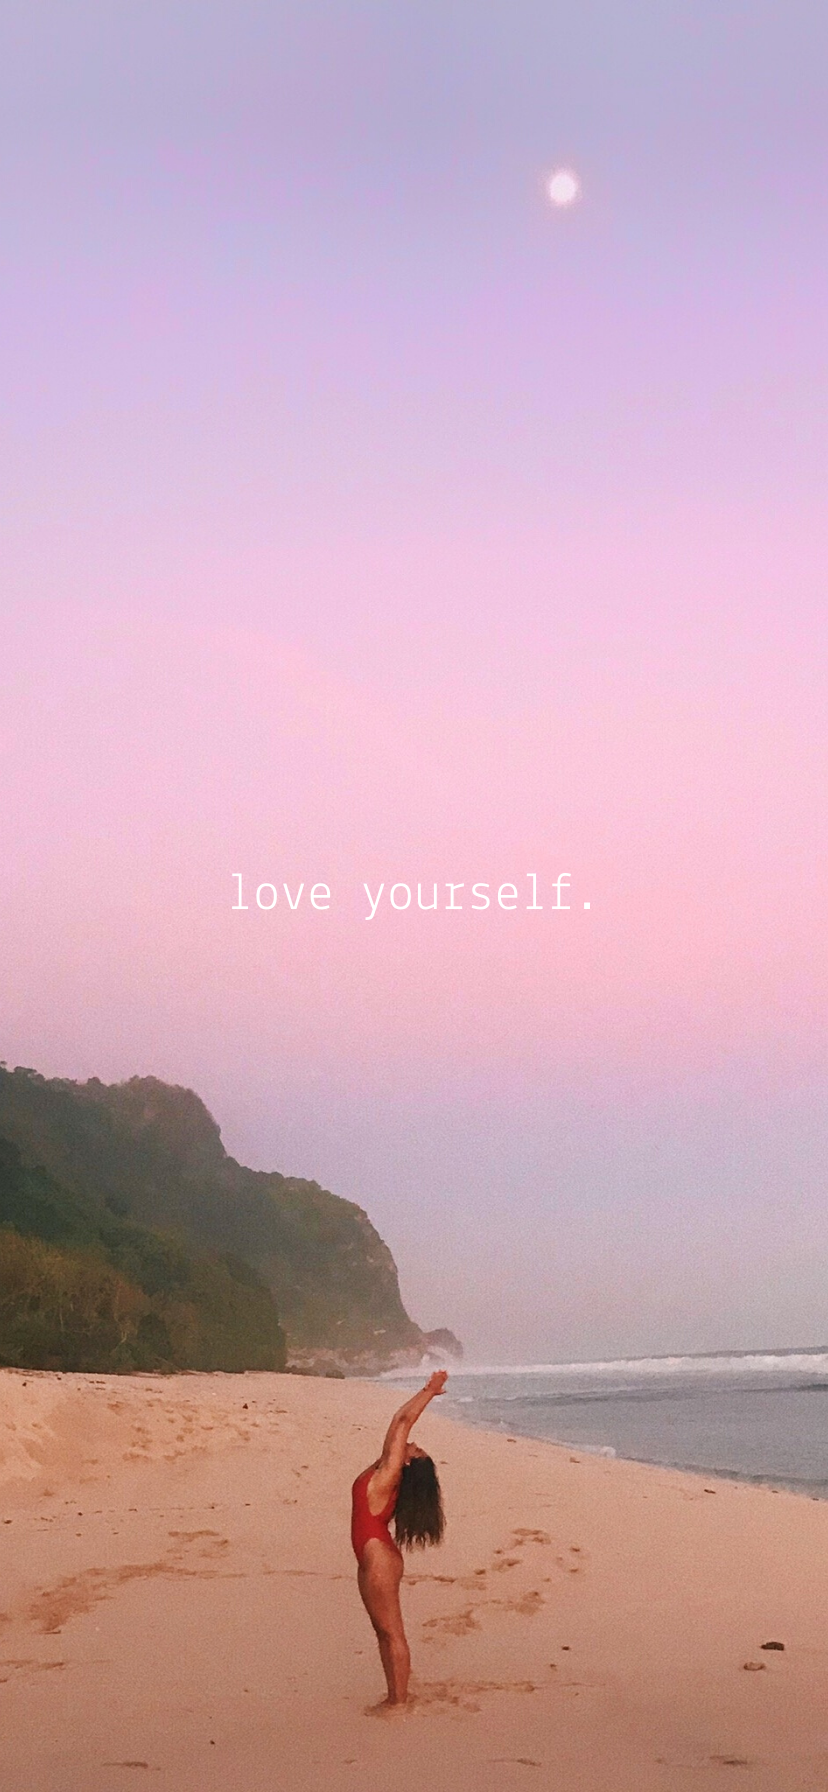 Self Love Wallpaper- Free Self Love Background. Mary's Cup of Tea